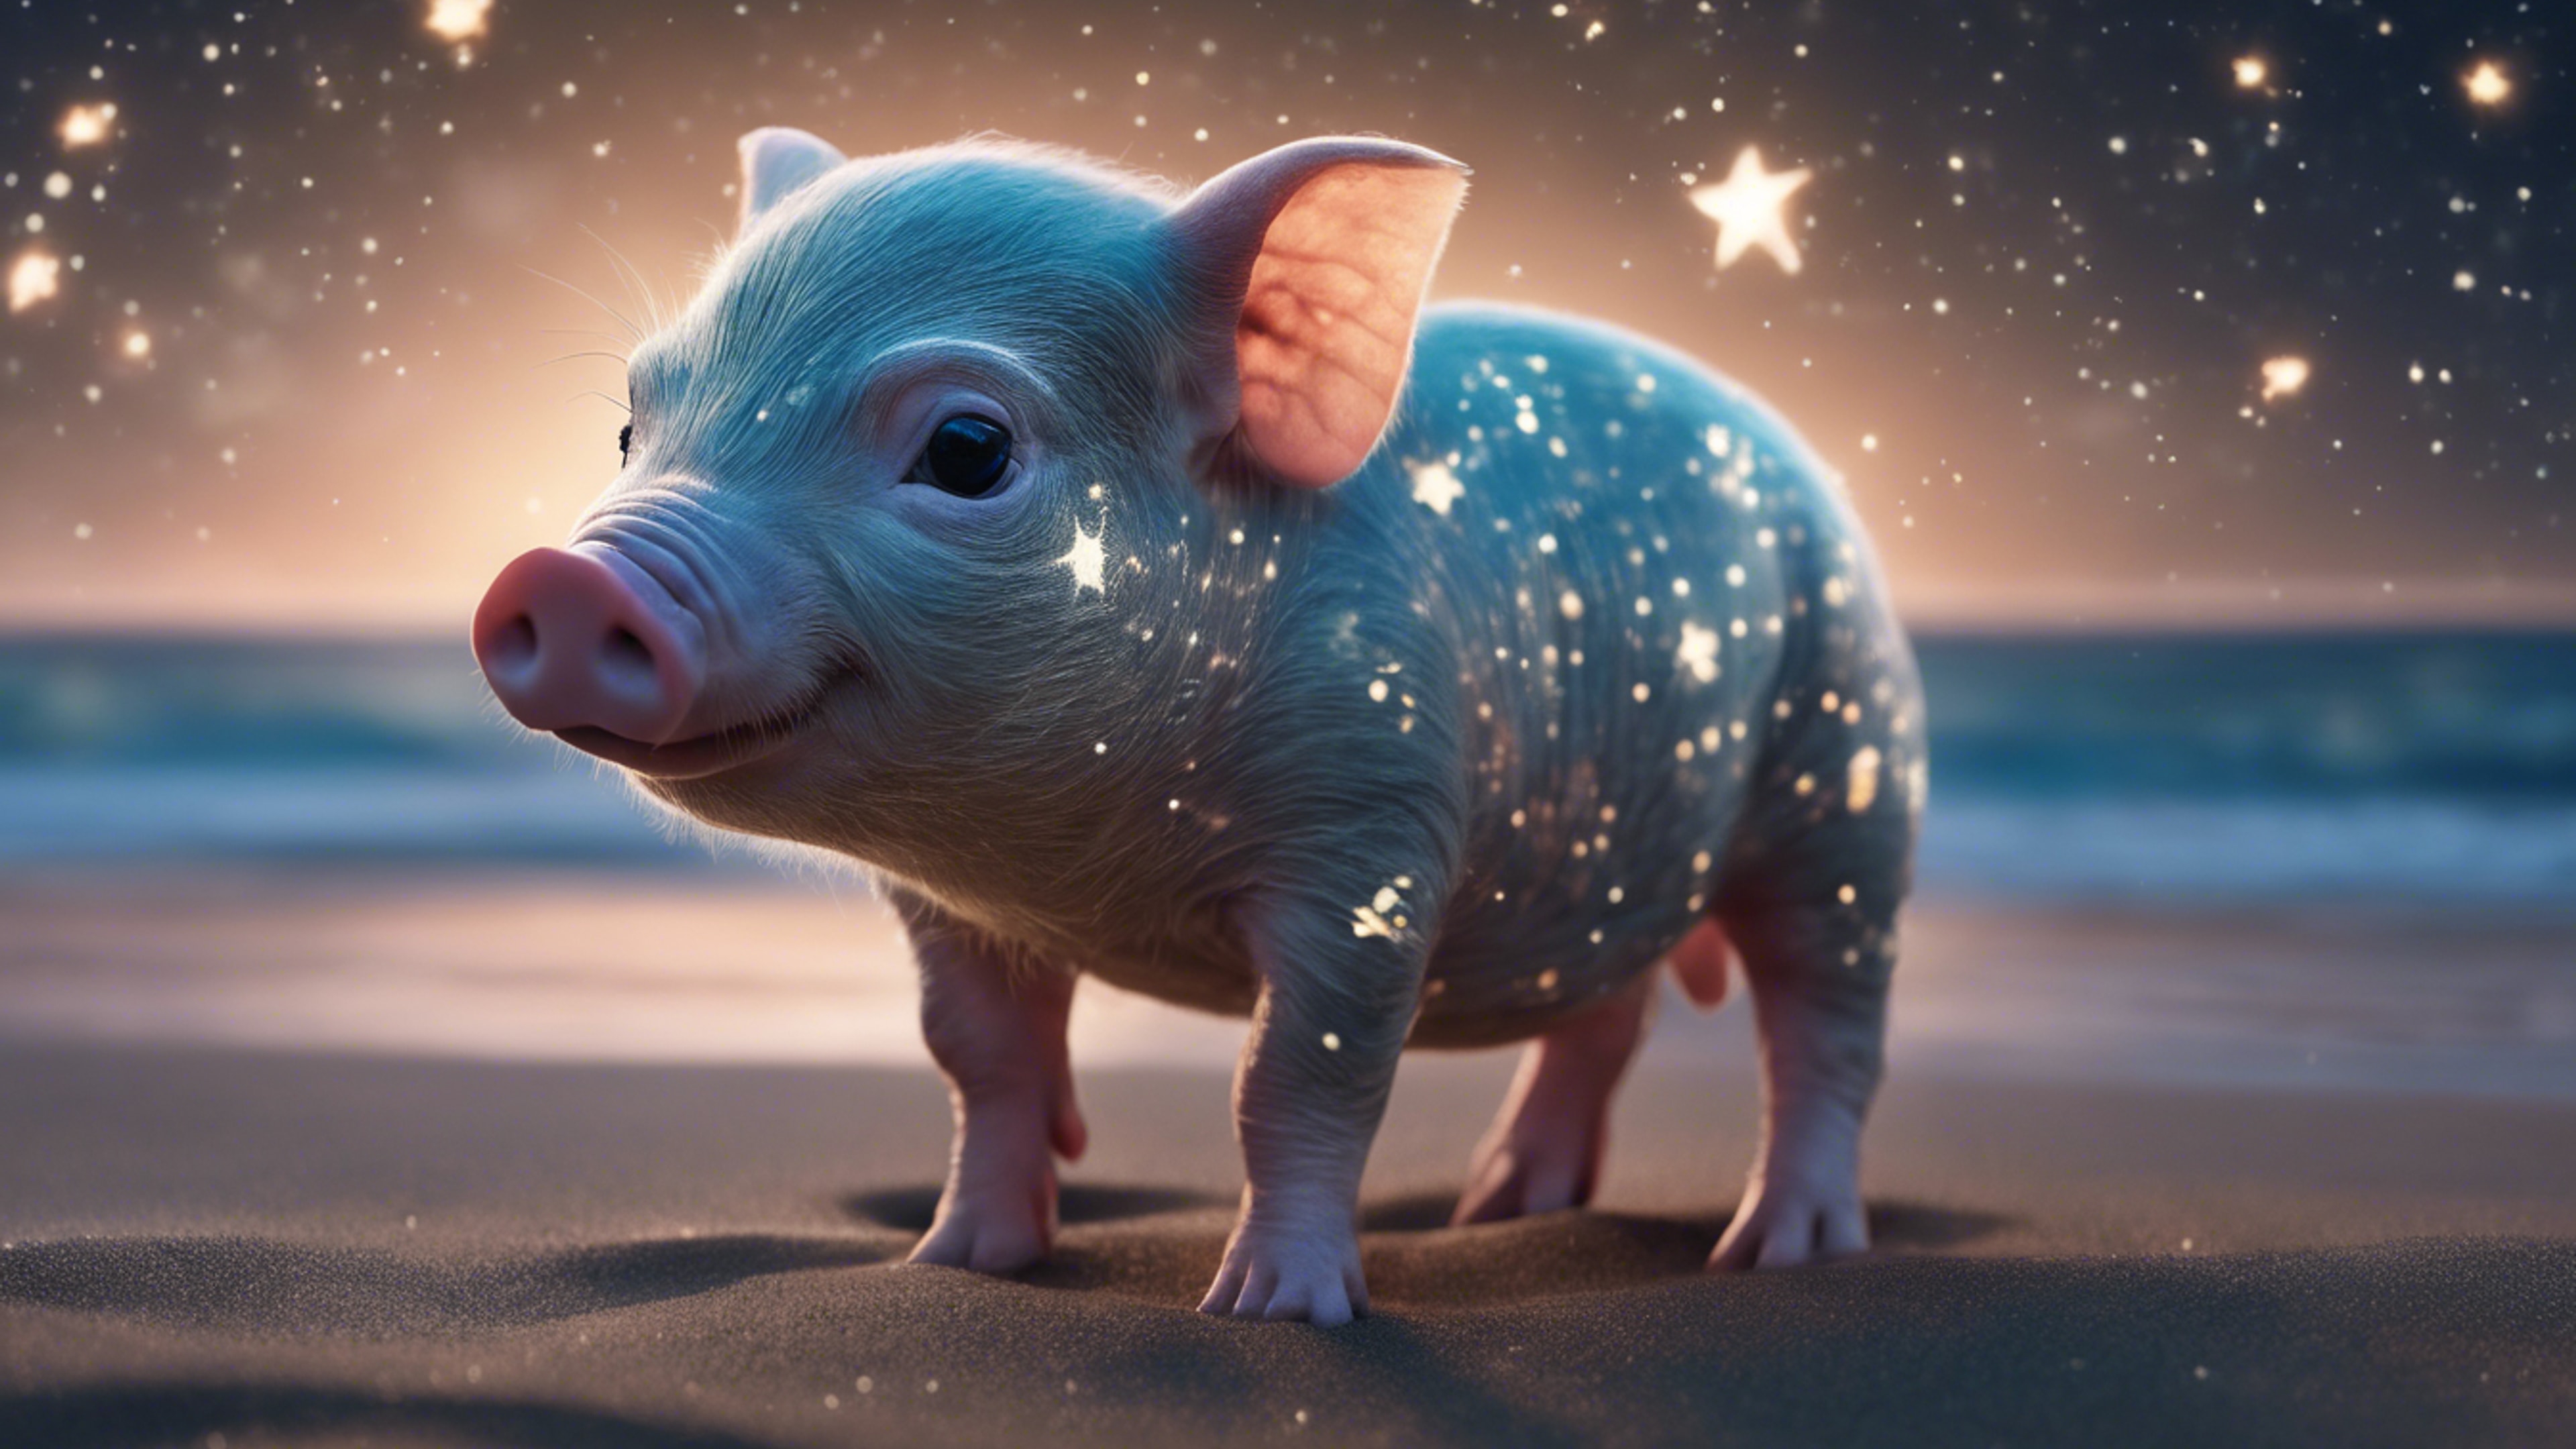 An unique digital rendering of a bioluminescent piglet on a calm beach under starry night sky. ورق الجدران[597018af159c4f7fa895]